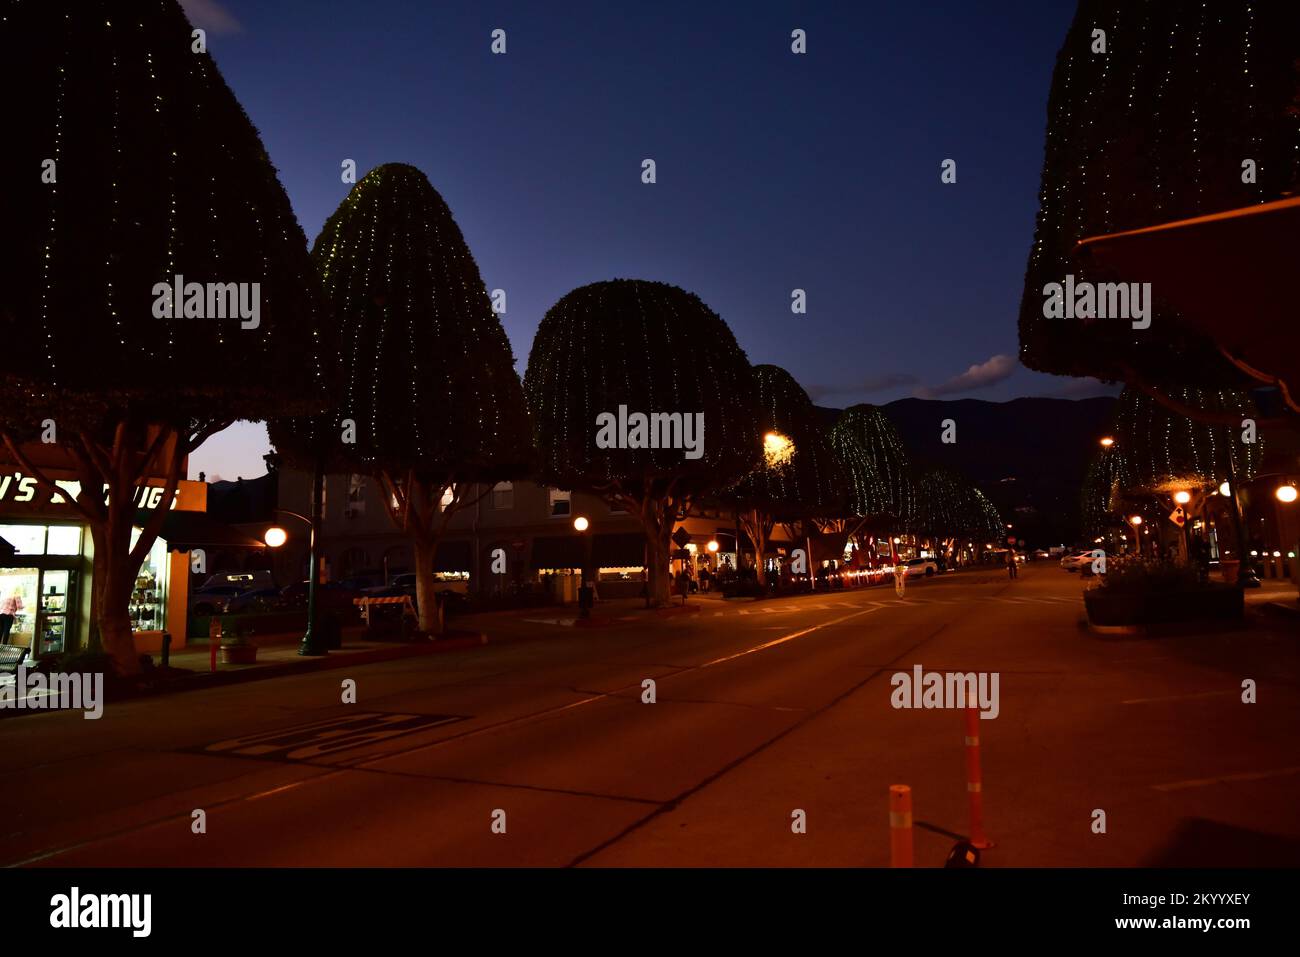 Rows of tall ficus trees lining a downtown city street with Christmas lights,  lighting the city at night Stock Photo